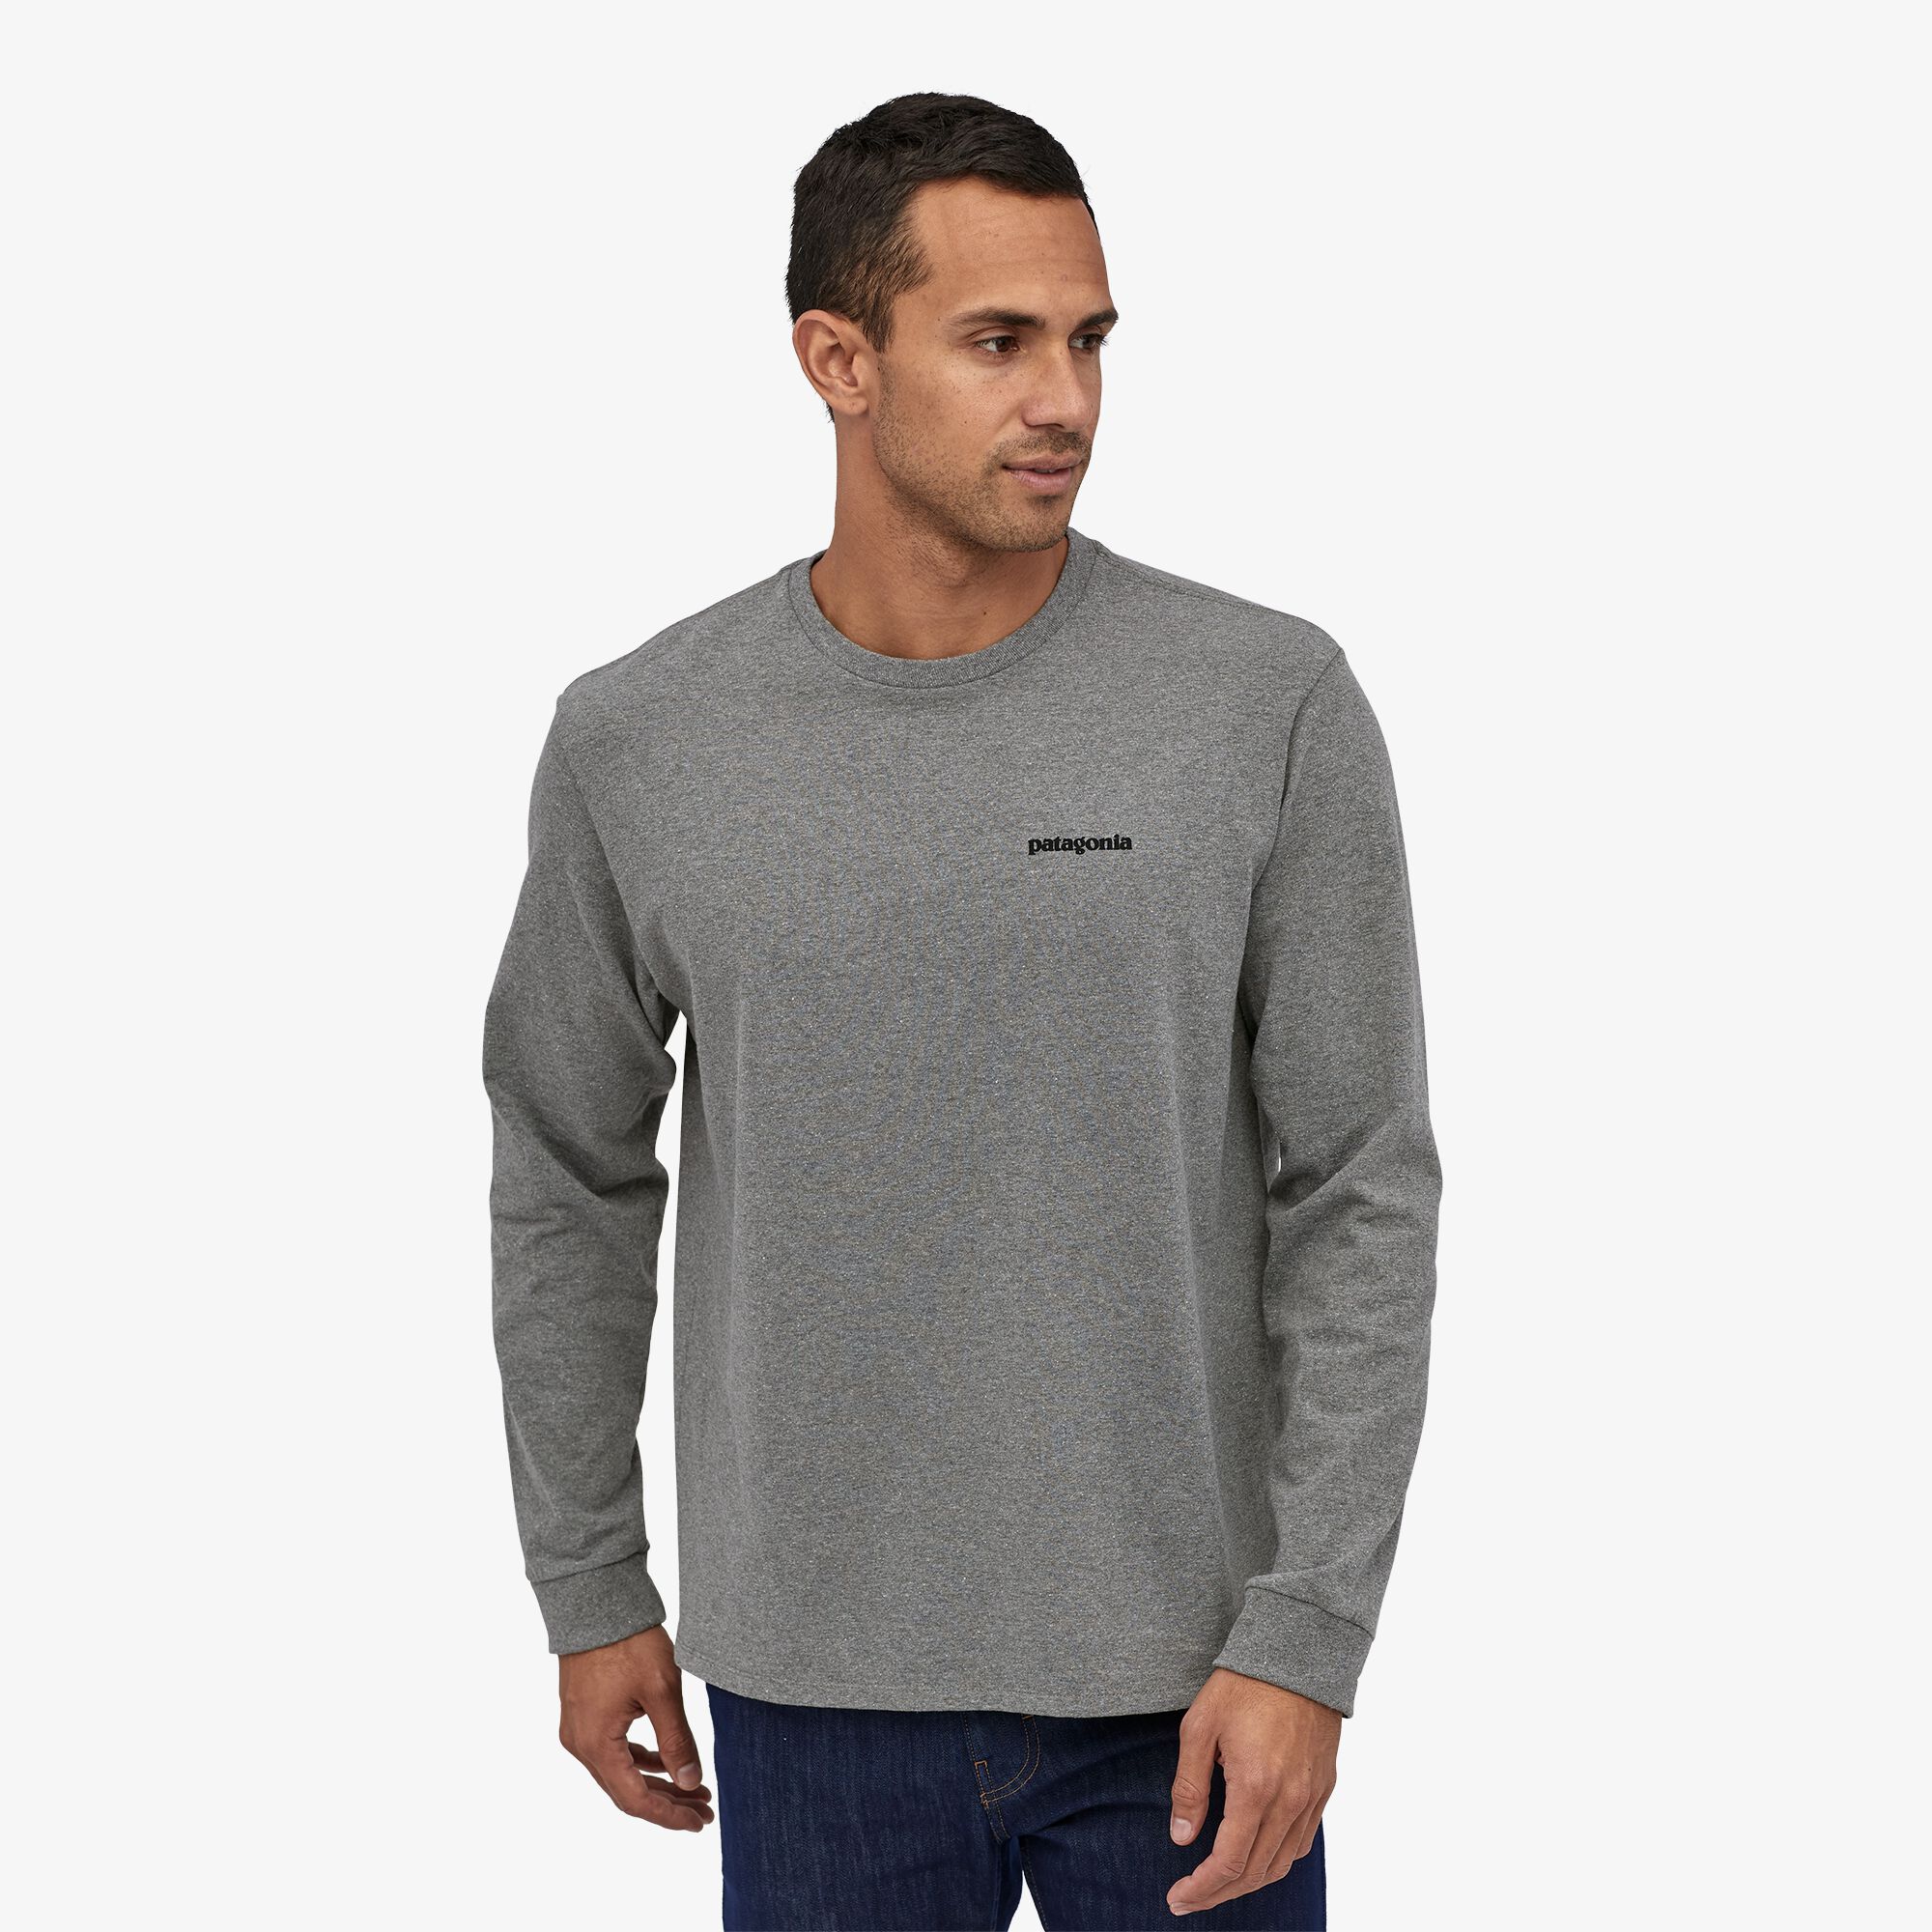 Patagonia Men's Long-Sleeved Fitz Roy Trout Responsibili-Tee®